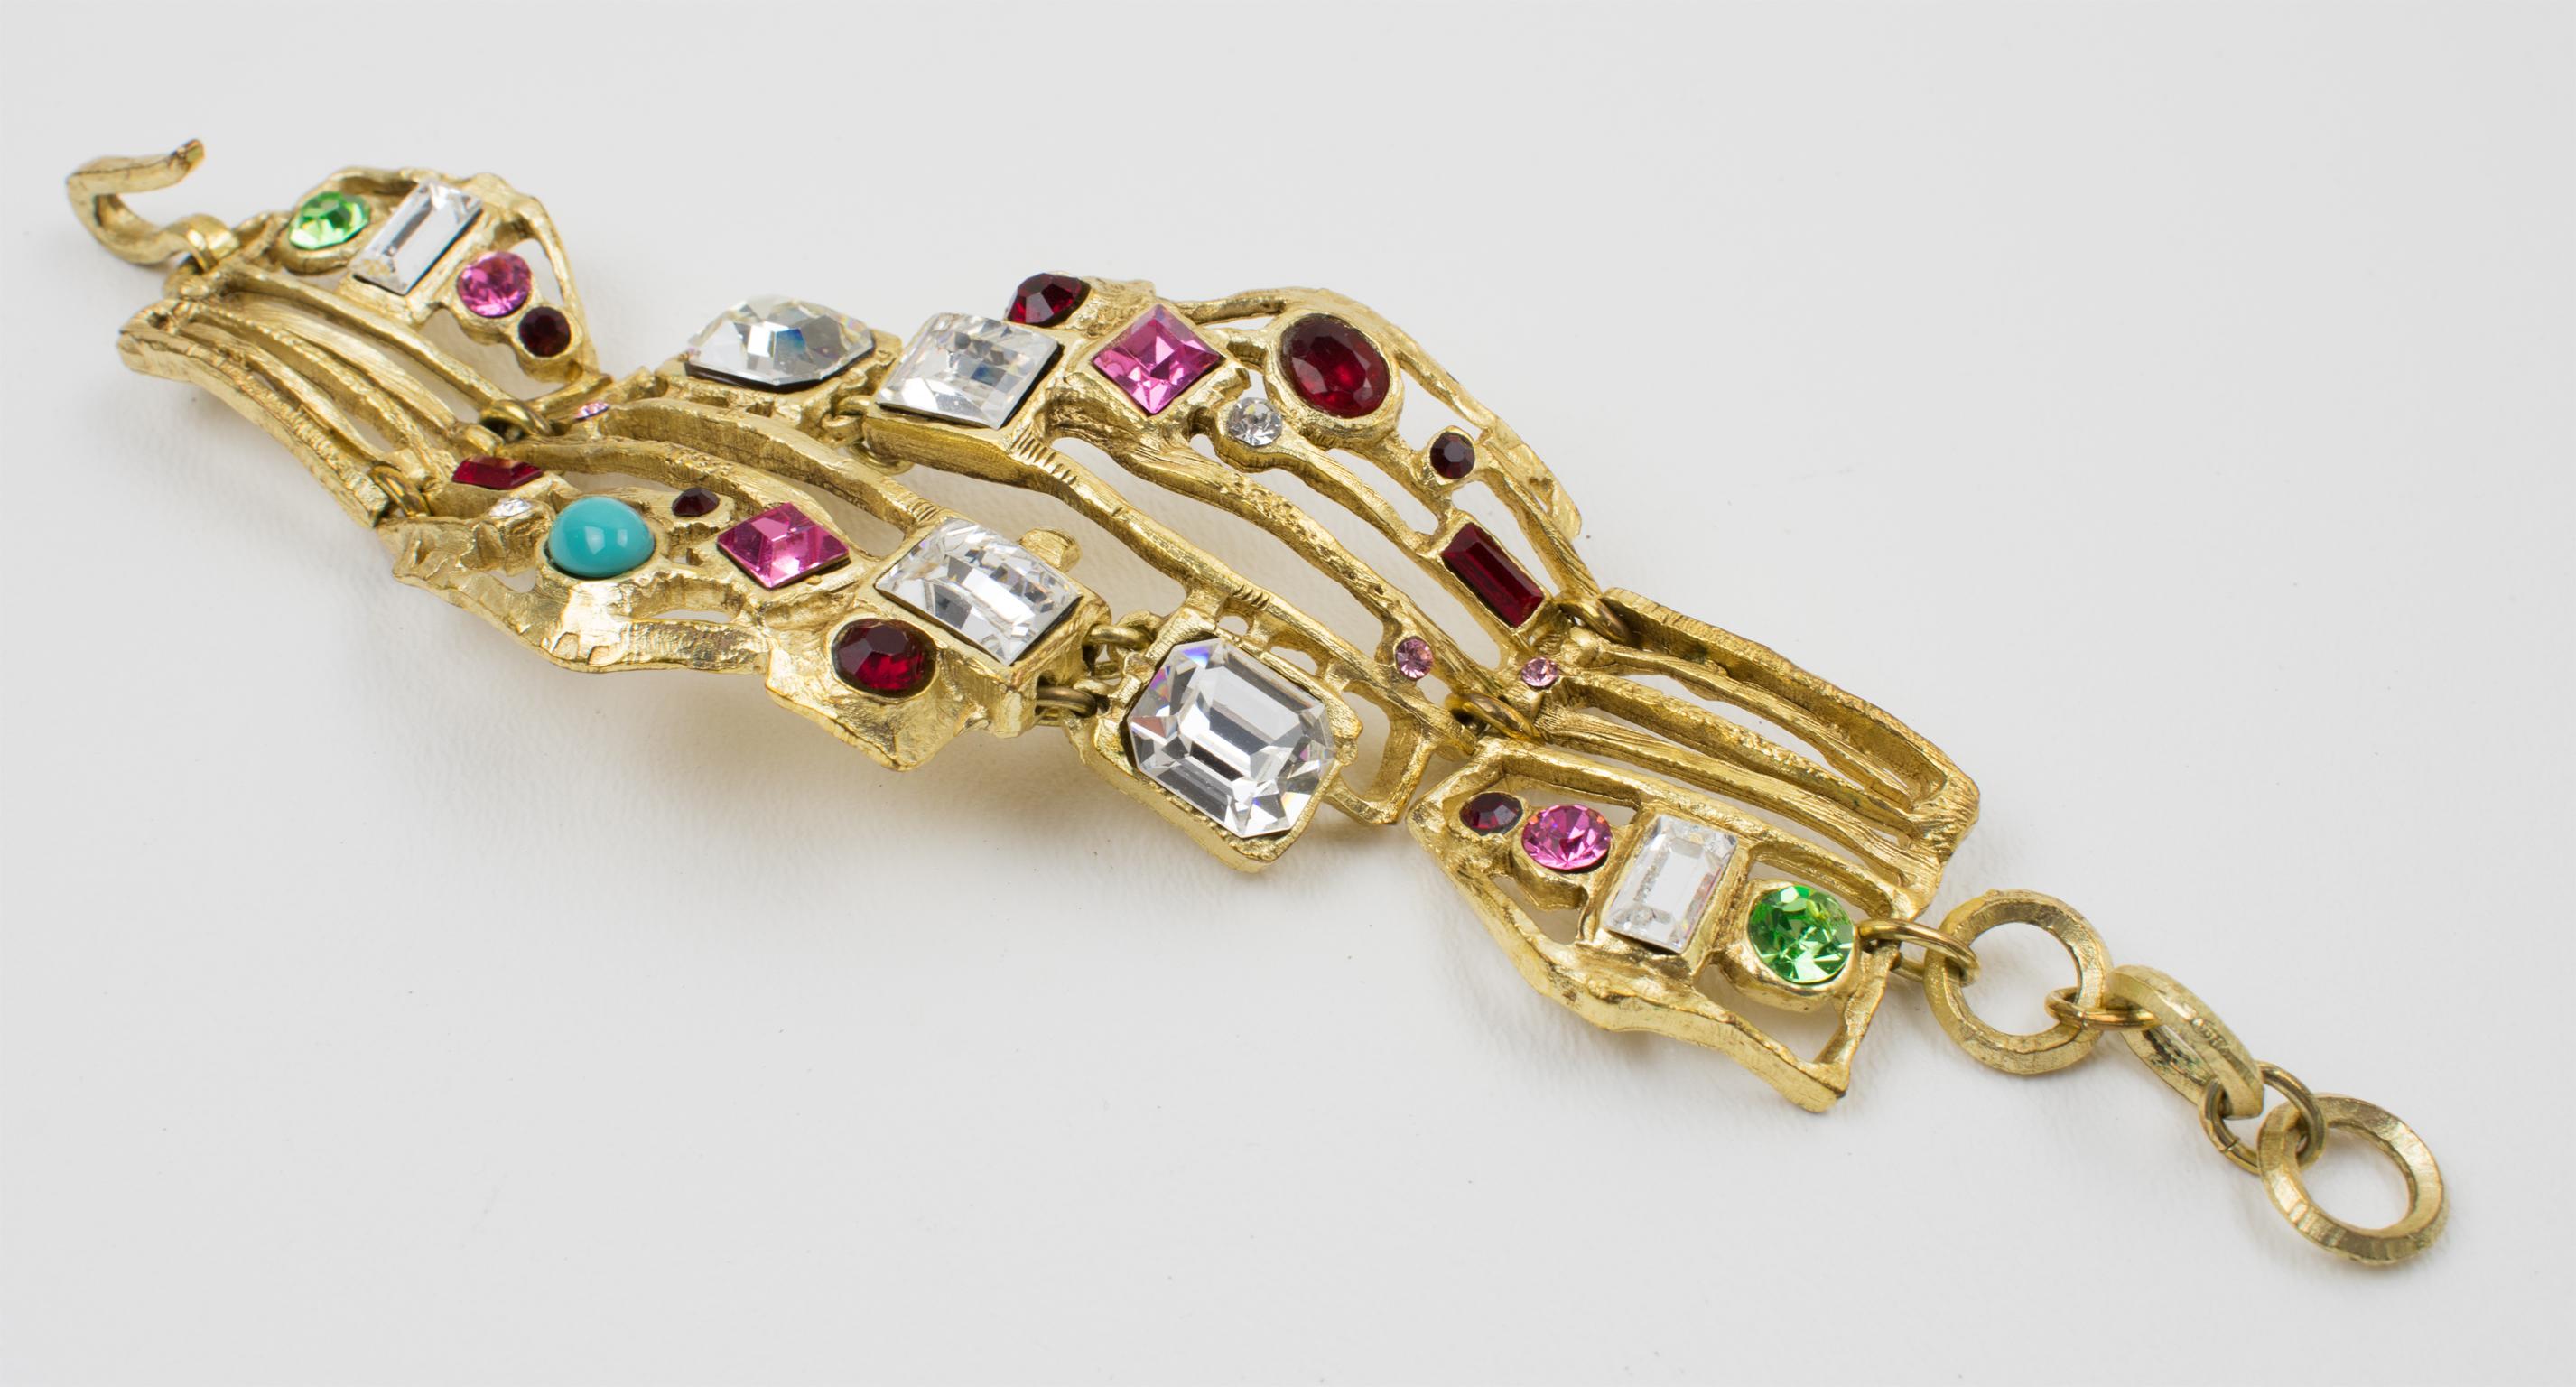 This sophisticated Christian Lacroix Paris link bracelet features baroque ornamental detailing with a brutalist design. The semi-mat gilt metal carved and see-thru with texture framing is embellished with crystal rhinestones in various shapes. There